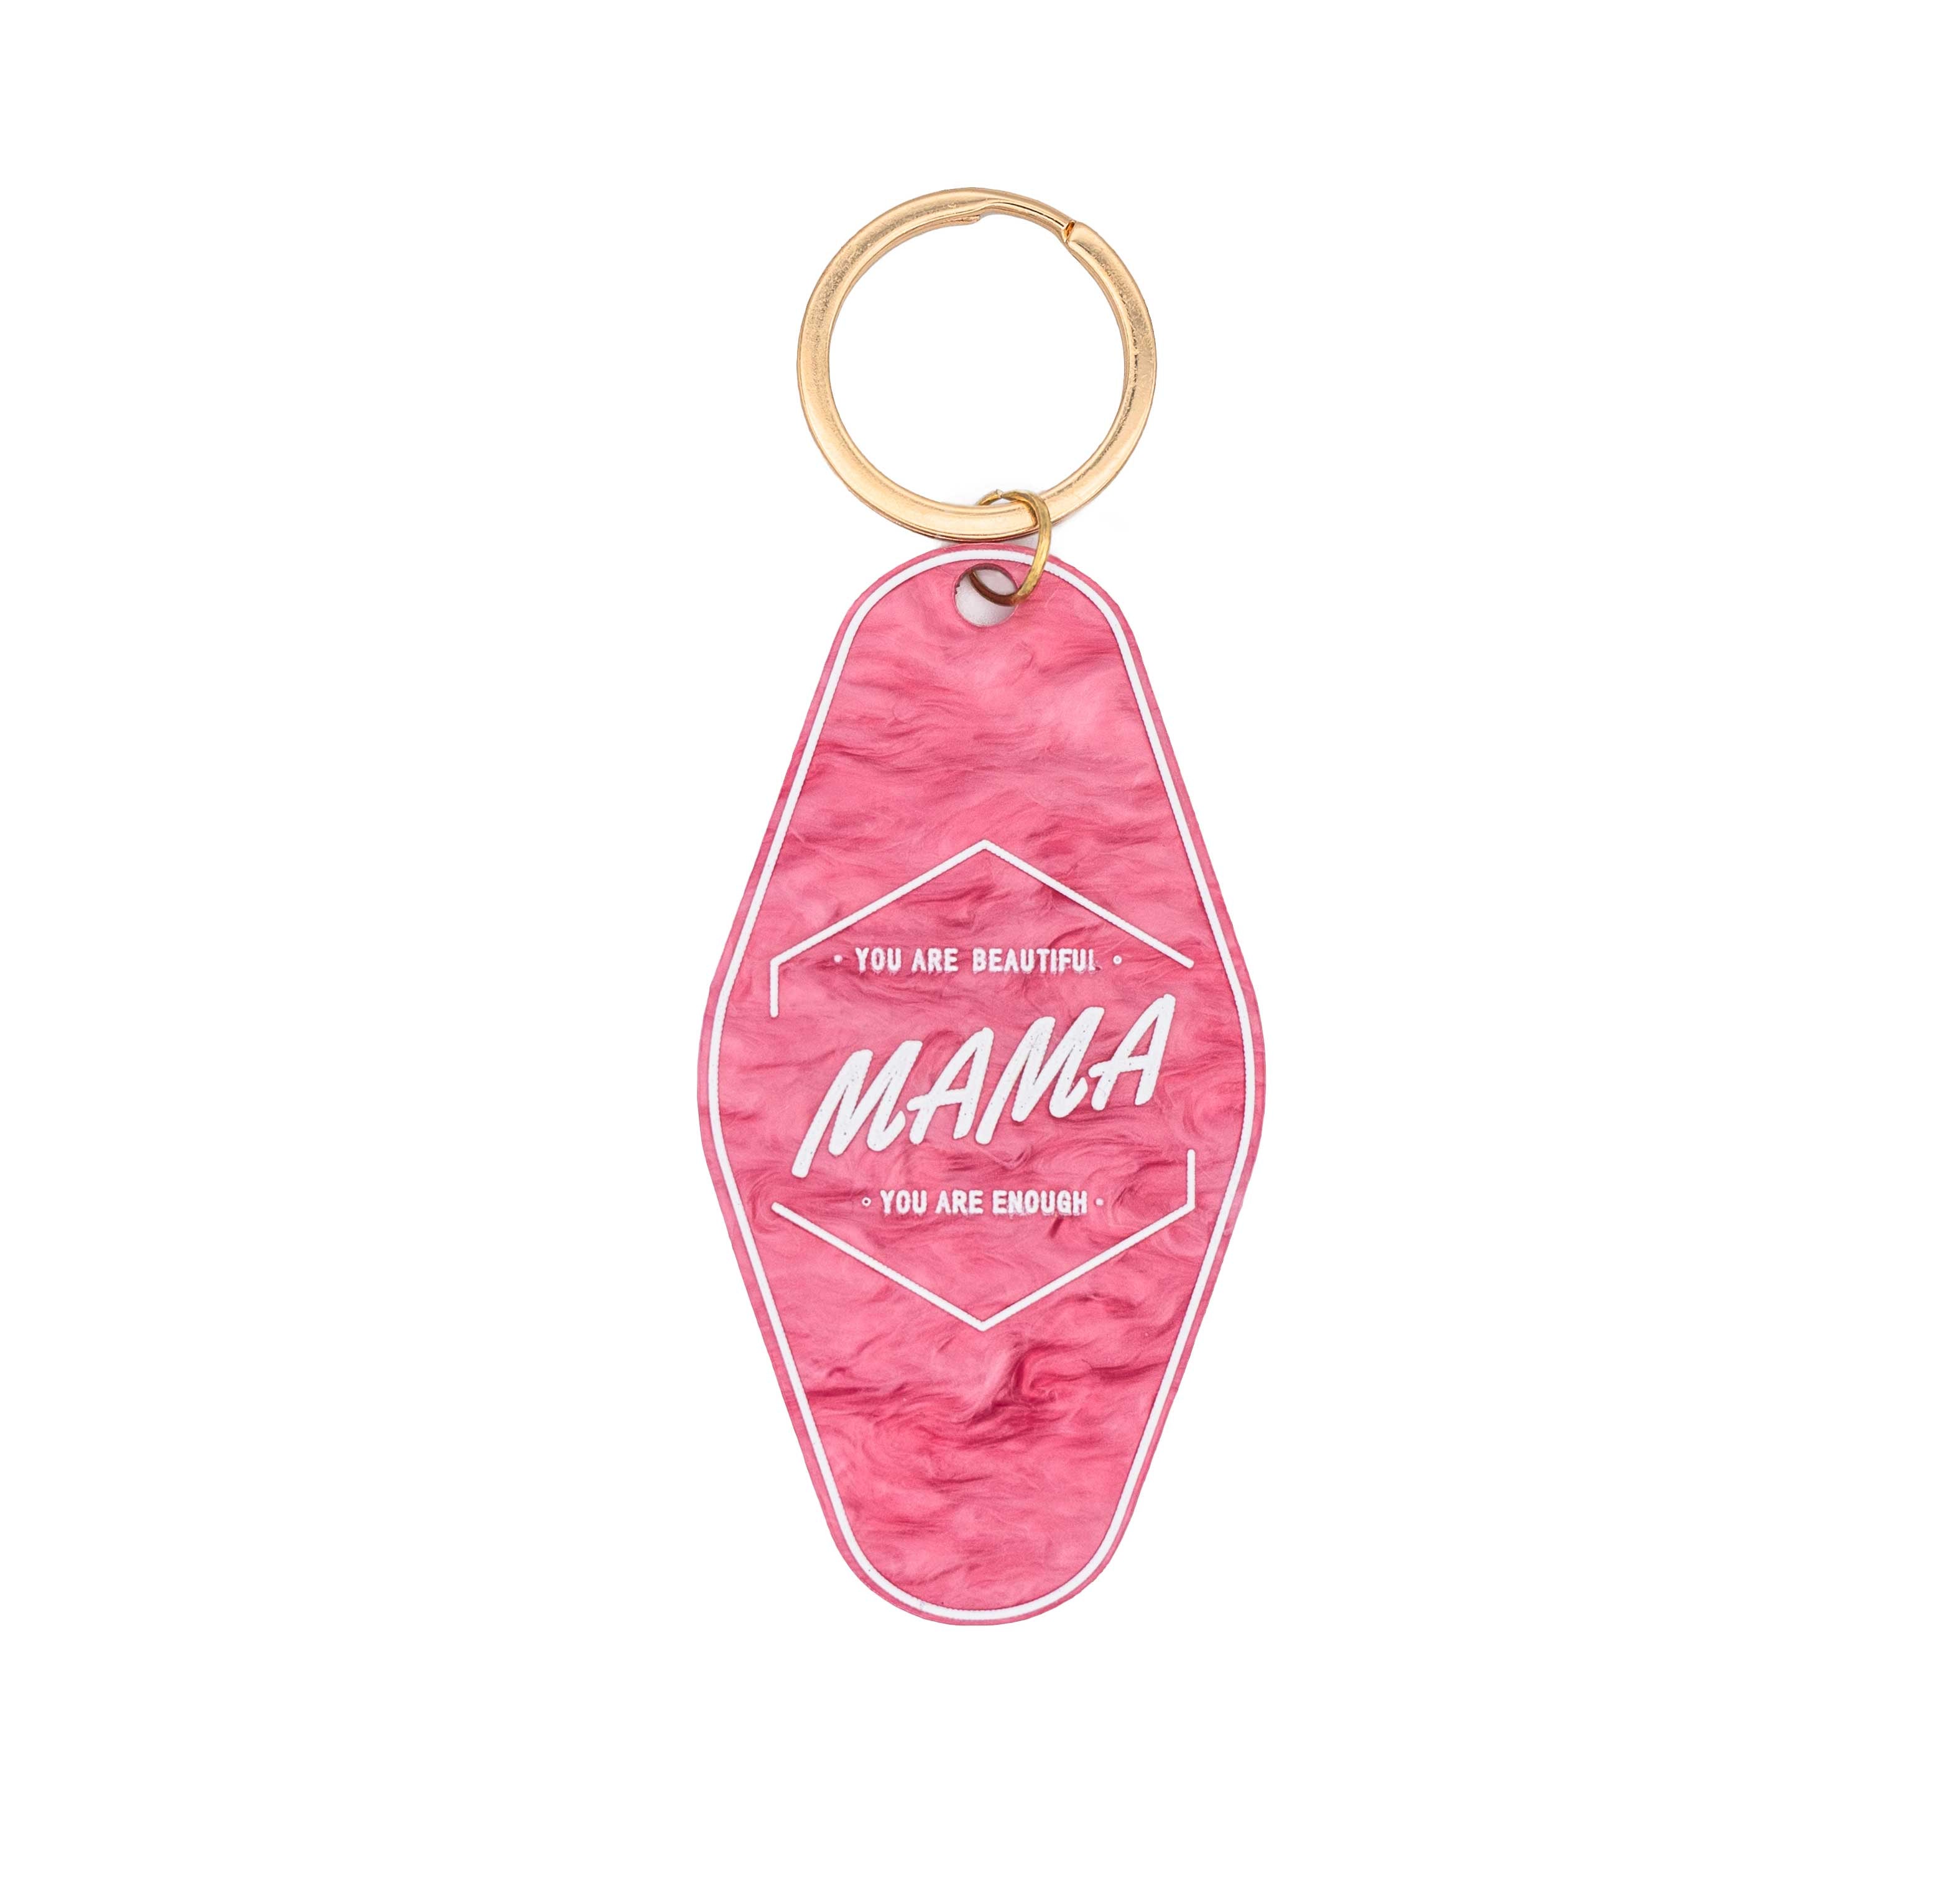 Thelma and Louise Hotel Keychain